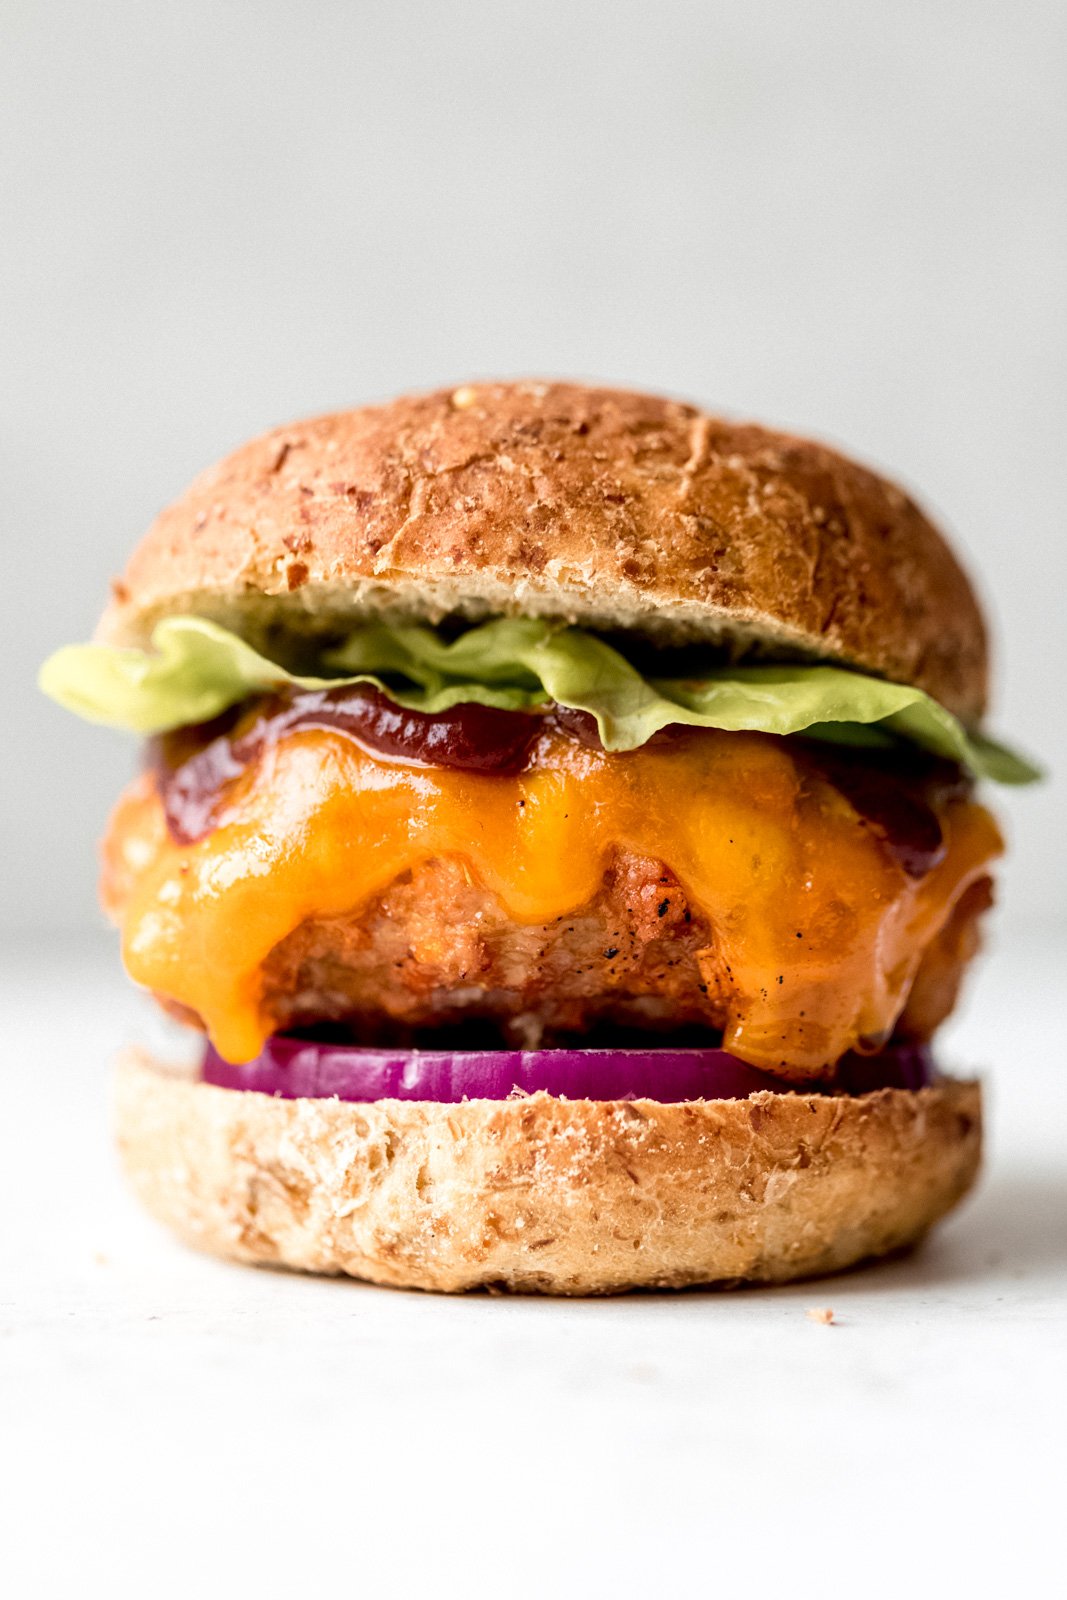 bbq chicken burger topped with lettuce, cheese, and bbq sauce